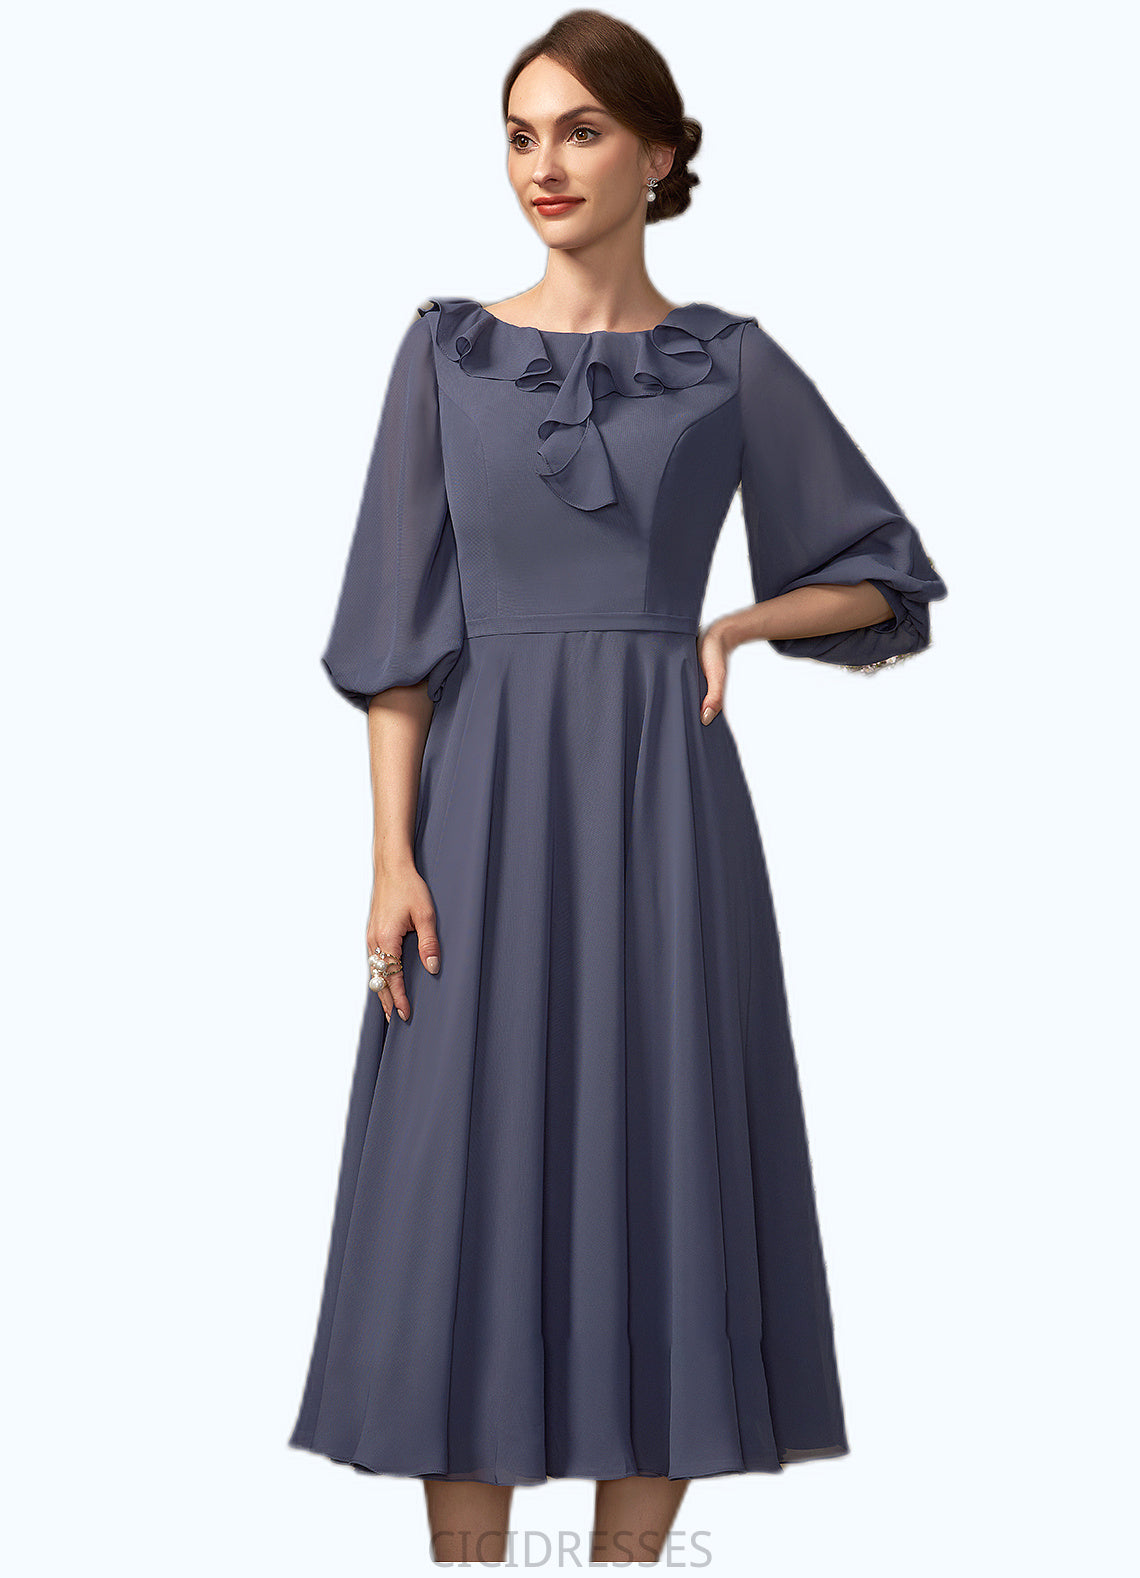 Blanche A-Line Scoop Neck Tea-Length Chiffon Mother of the Bride Dress With Cascading Ruffles CIC8126P0014920